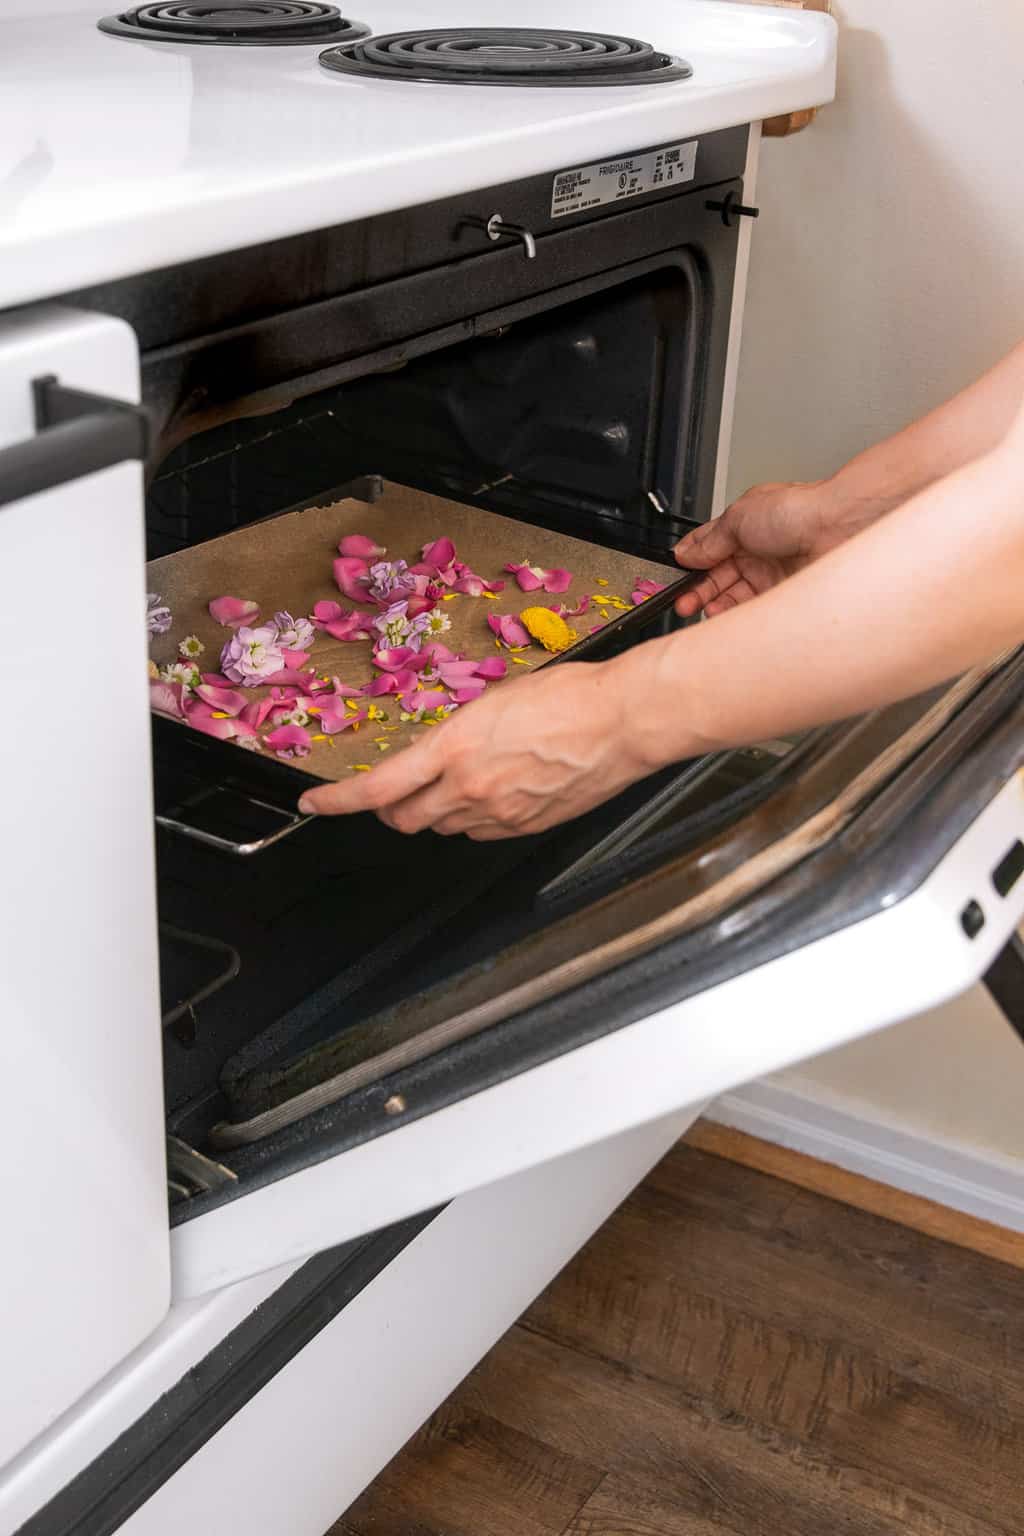 Putting flowers in the oven to dry them